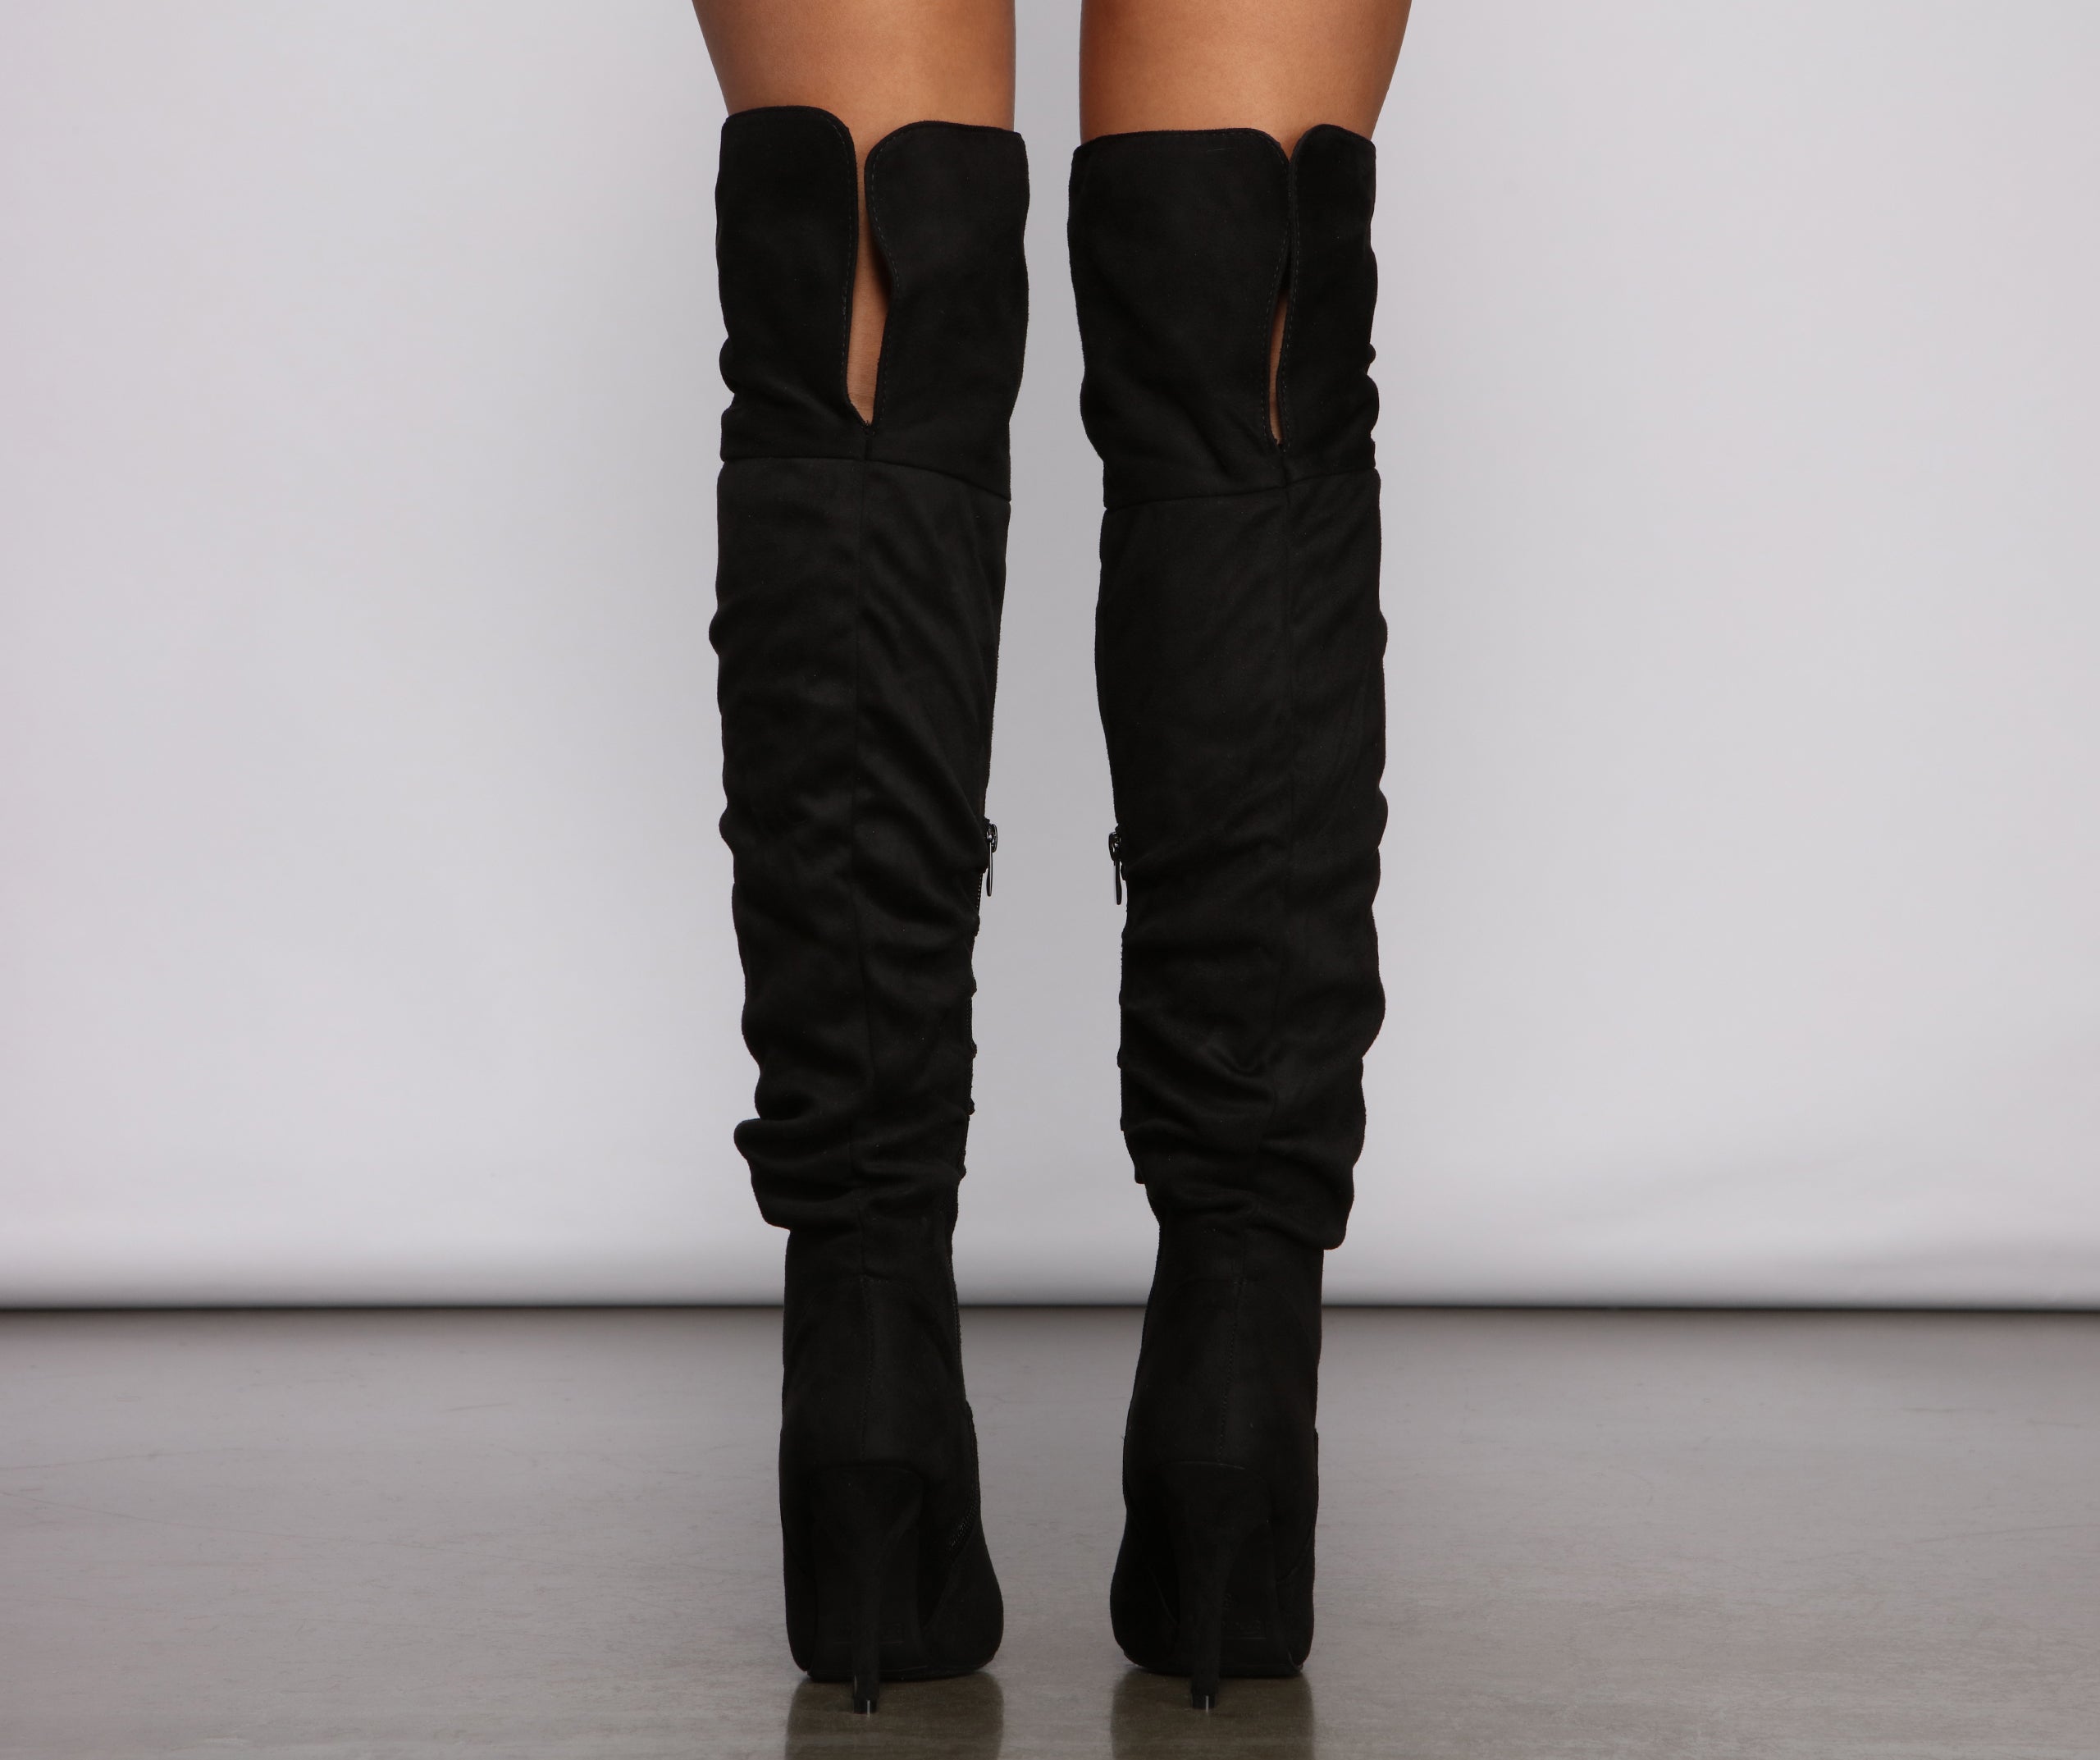 Essential Over the Knee Stiletto Heel Boots